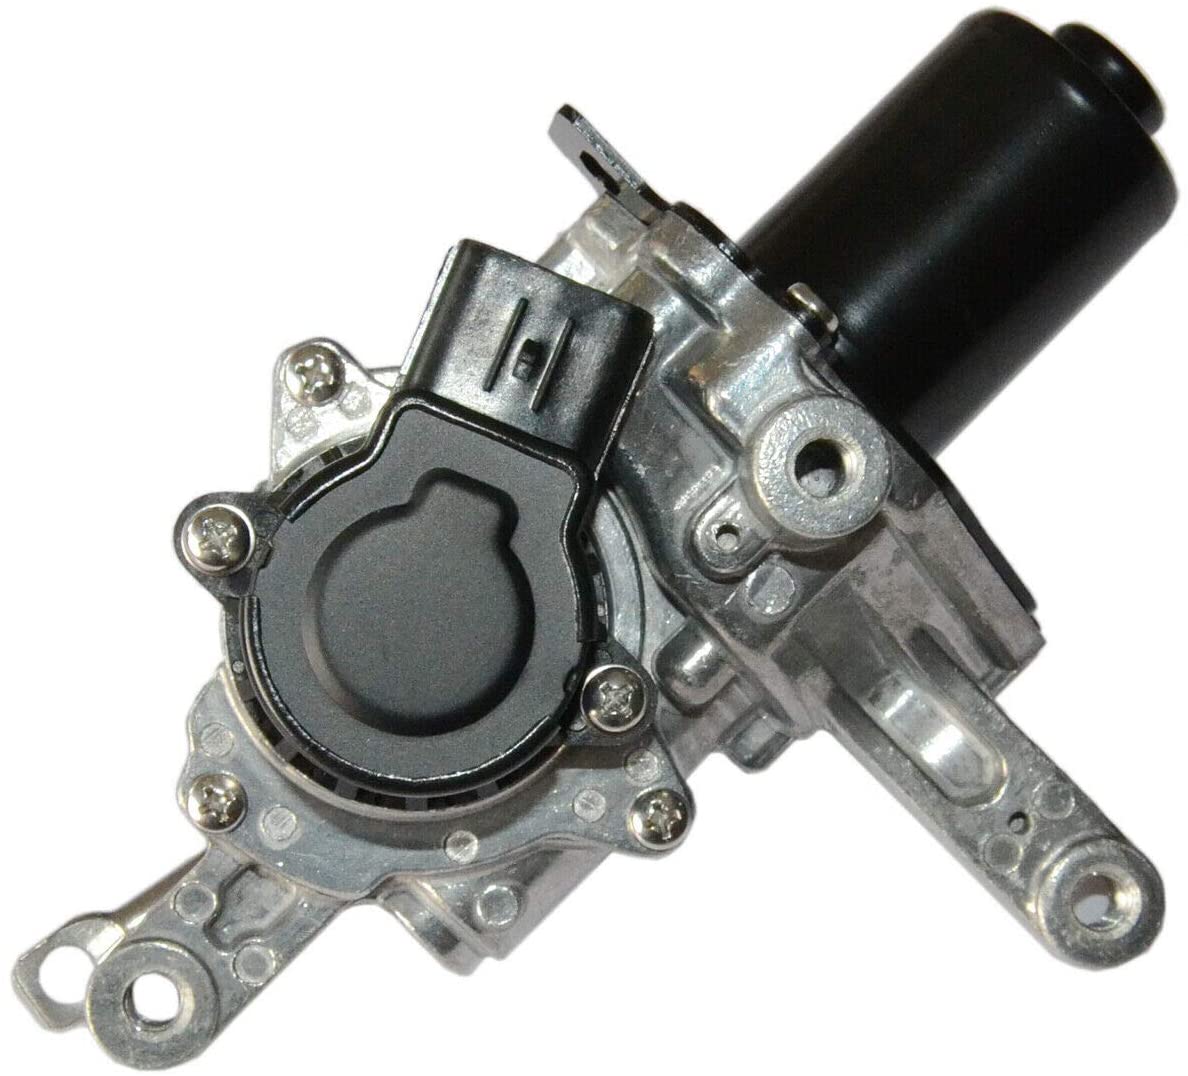 Electronic Turbo Actuator 1720130100 Compatible with Toyota Hilux Land Cruiser Prado 3.0 D-4D 1KD-FTV 2002-2014